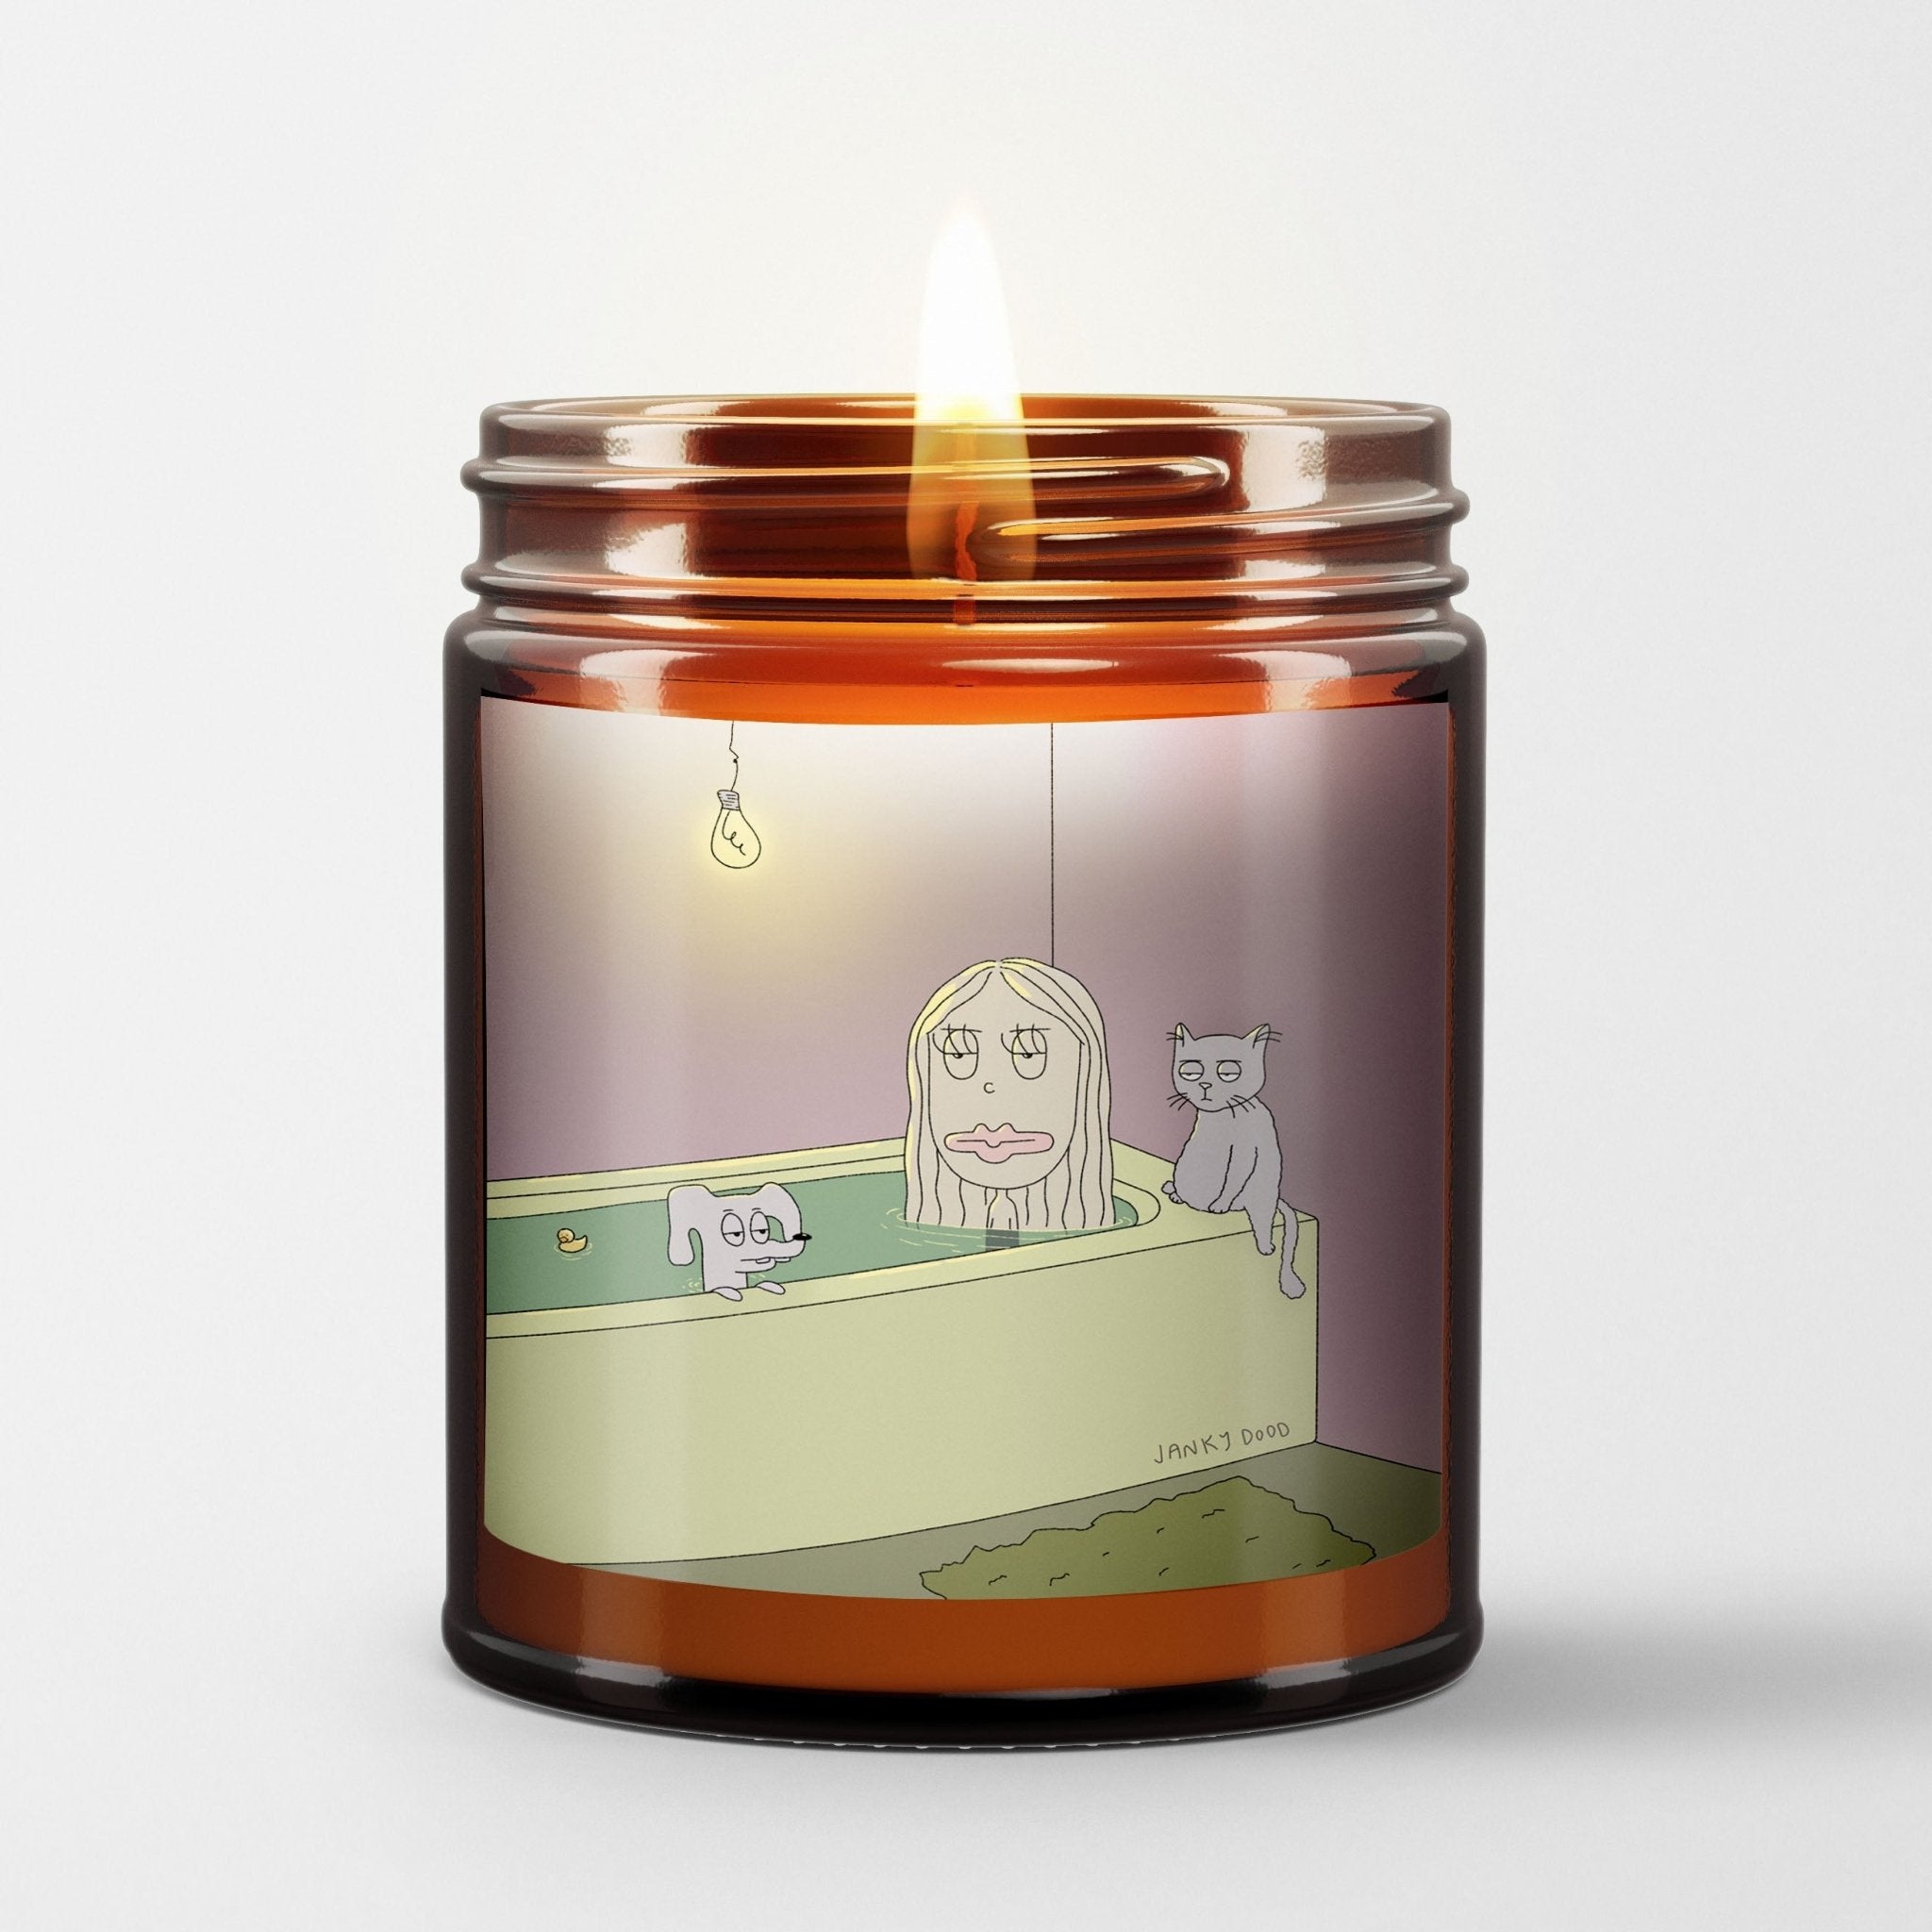 Janky Dood Scented Candle in Amber Glass Jar: I Ran Out of Bubbles - Candlefy